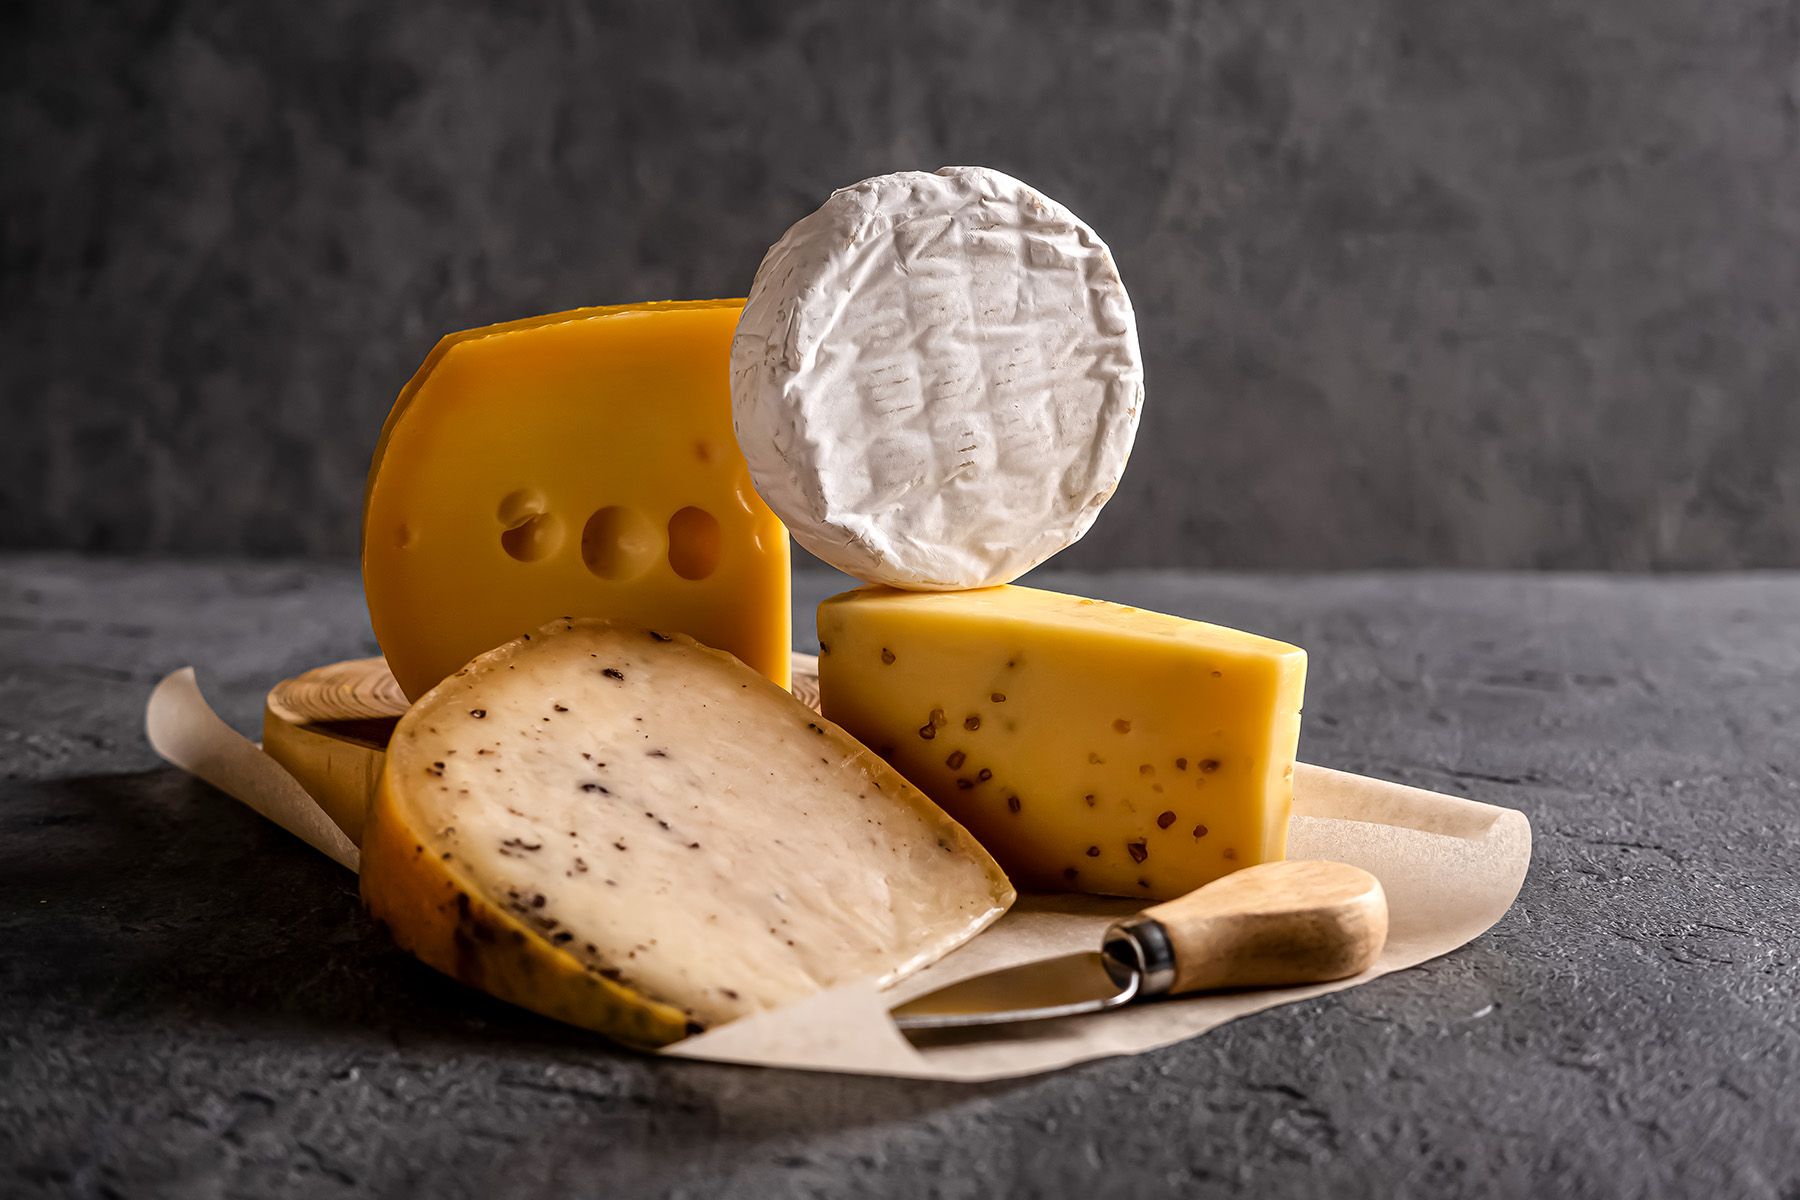 A collection of delicious cheeses for sandwich making